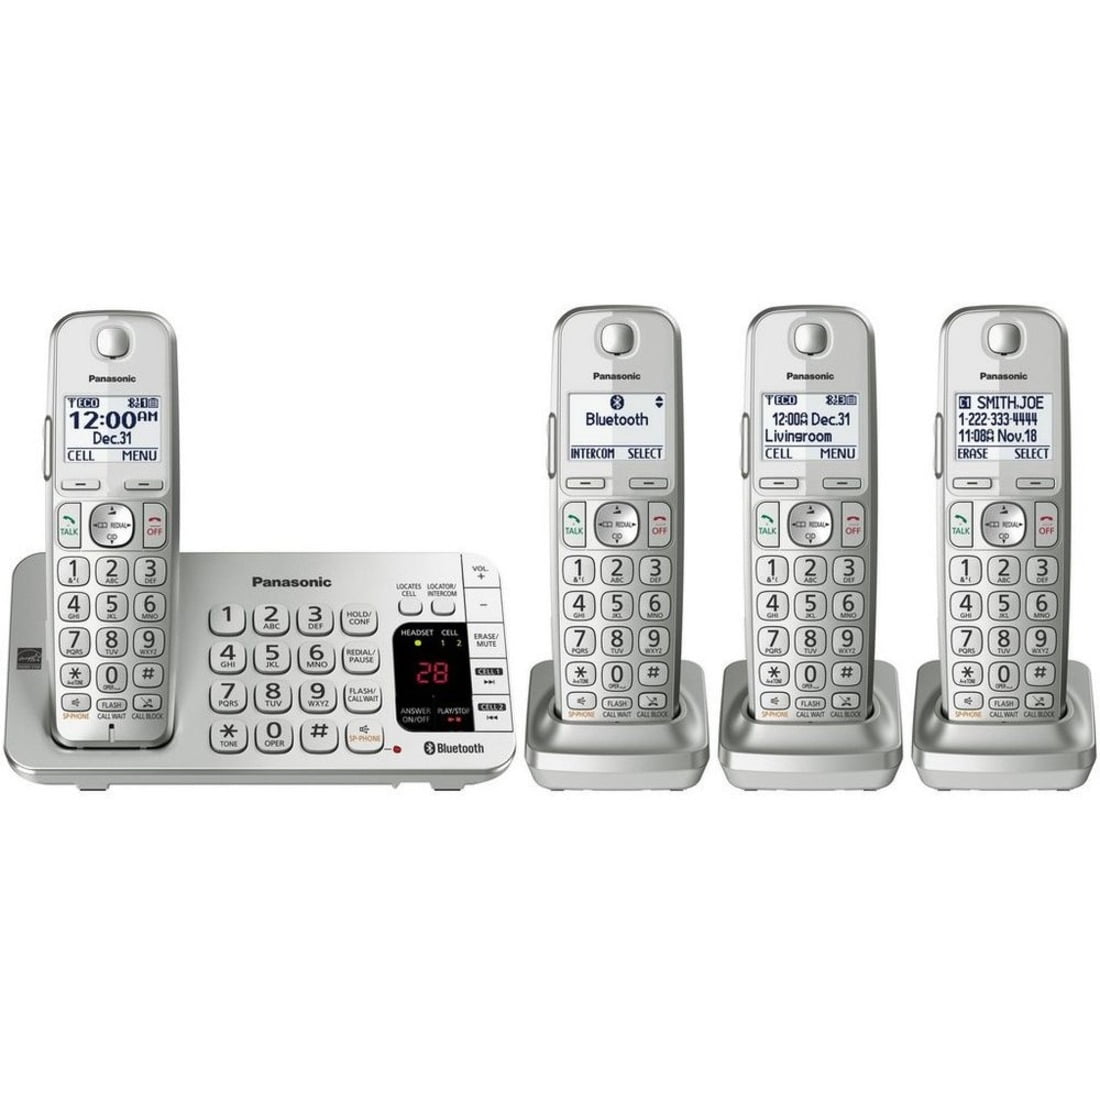 Panasonic Link2Cell KX-TGE474S DECT 6.0 1.90 GHz Cordless Phone, Silver 